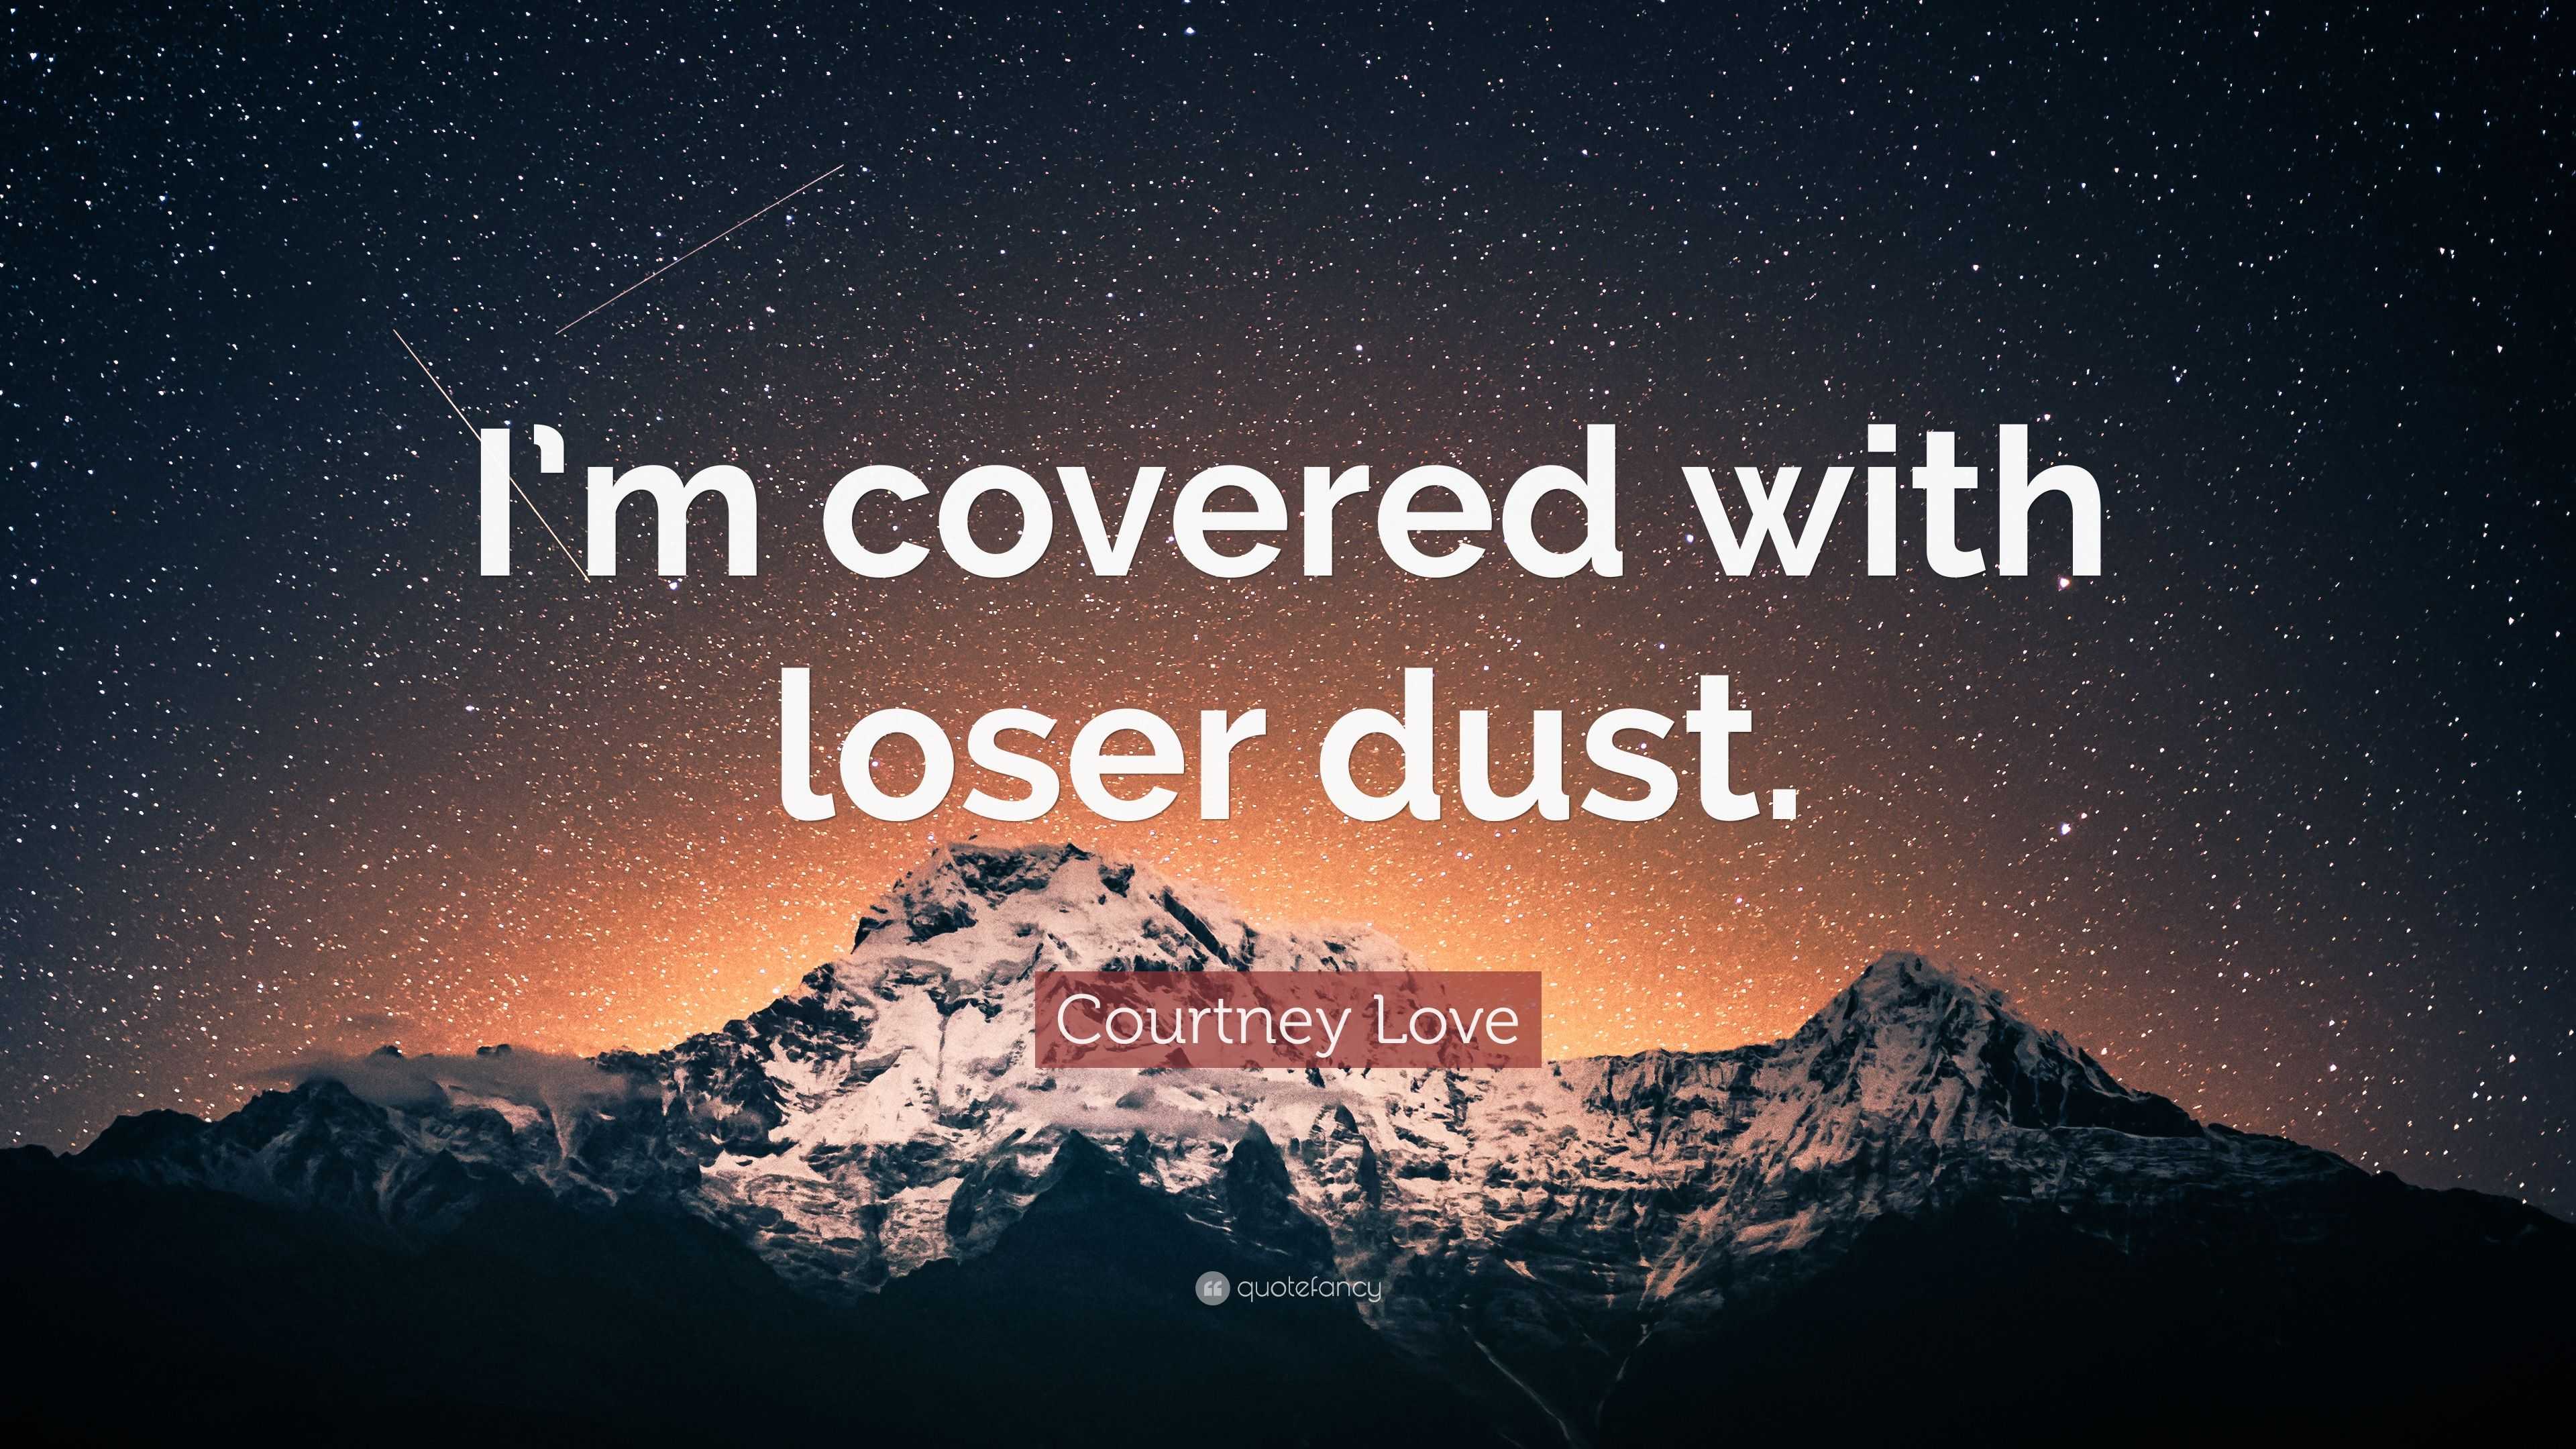 Courtney Love Quote: “I'm covered with loser dust.”